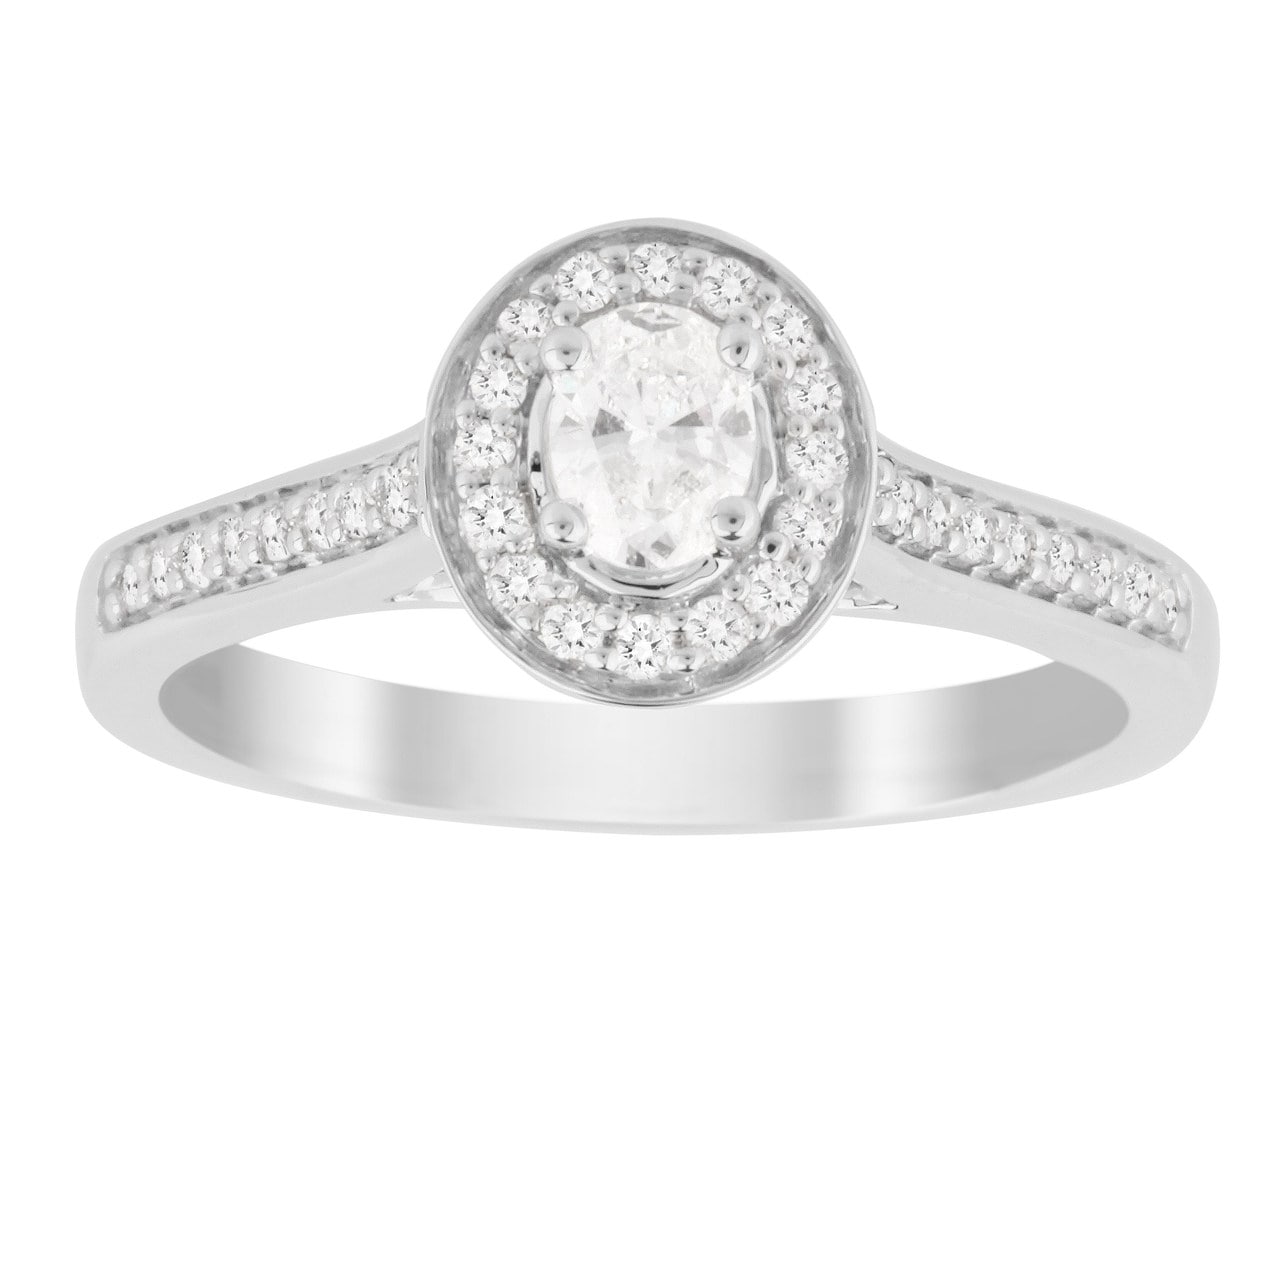 Oval Cut 0.35 Carat Total Weight Halo Diamond Ring In 18 Carat White Gold - Ring Size O